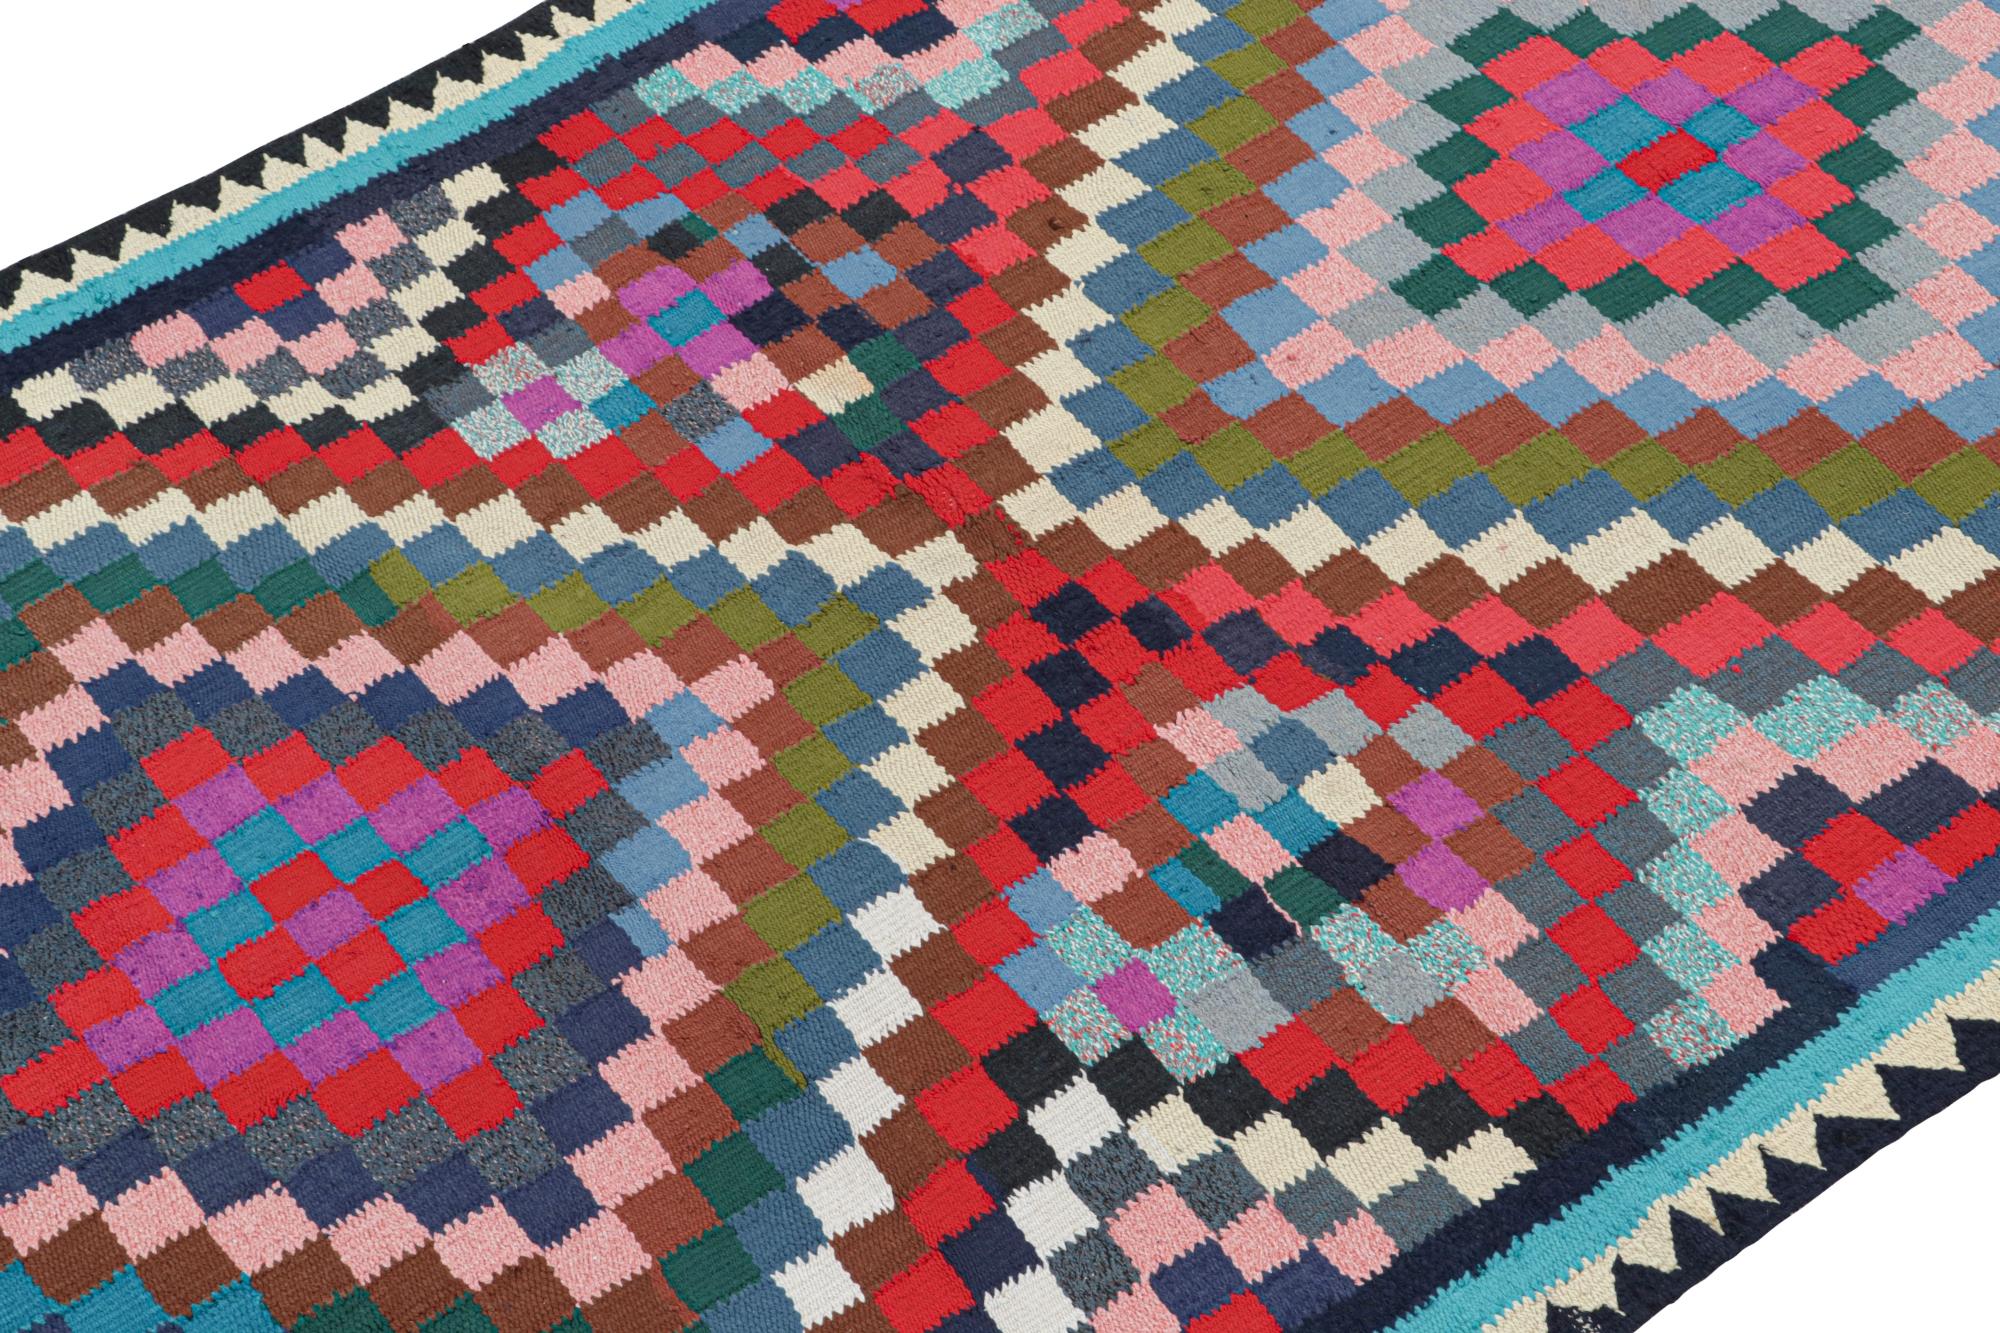 This vintage 5x9 Persian Kilim is handwoven in wool, and is believed to originate from Kurdistan circa 1950-1960.

On the Design: 

The fabulous flatweave enjoys geometric patterns in bright tones favouring red & sky blue. The one of a kind